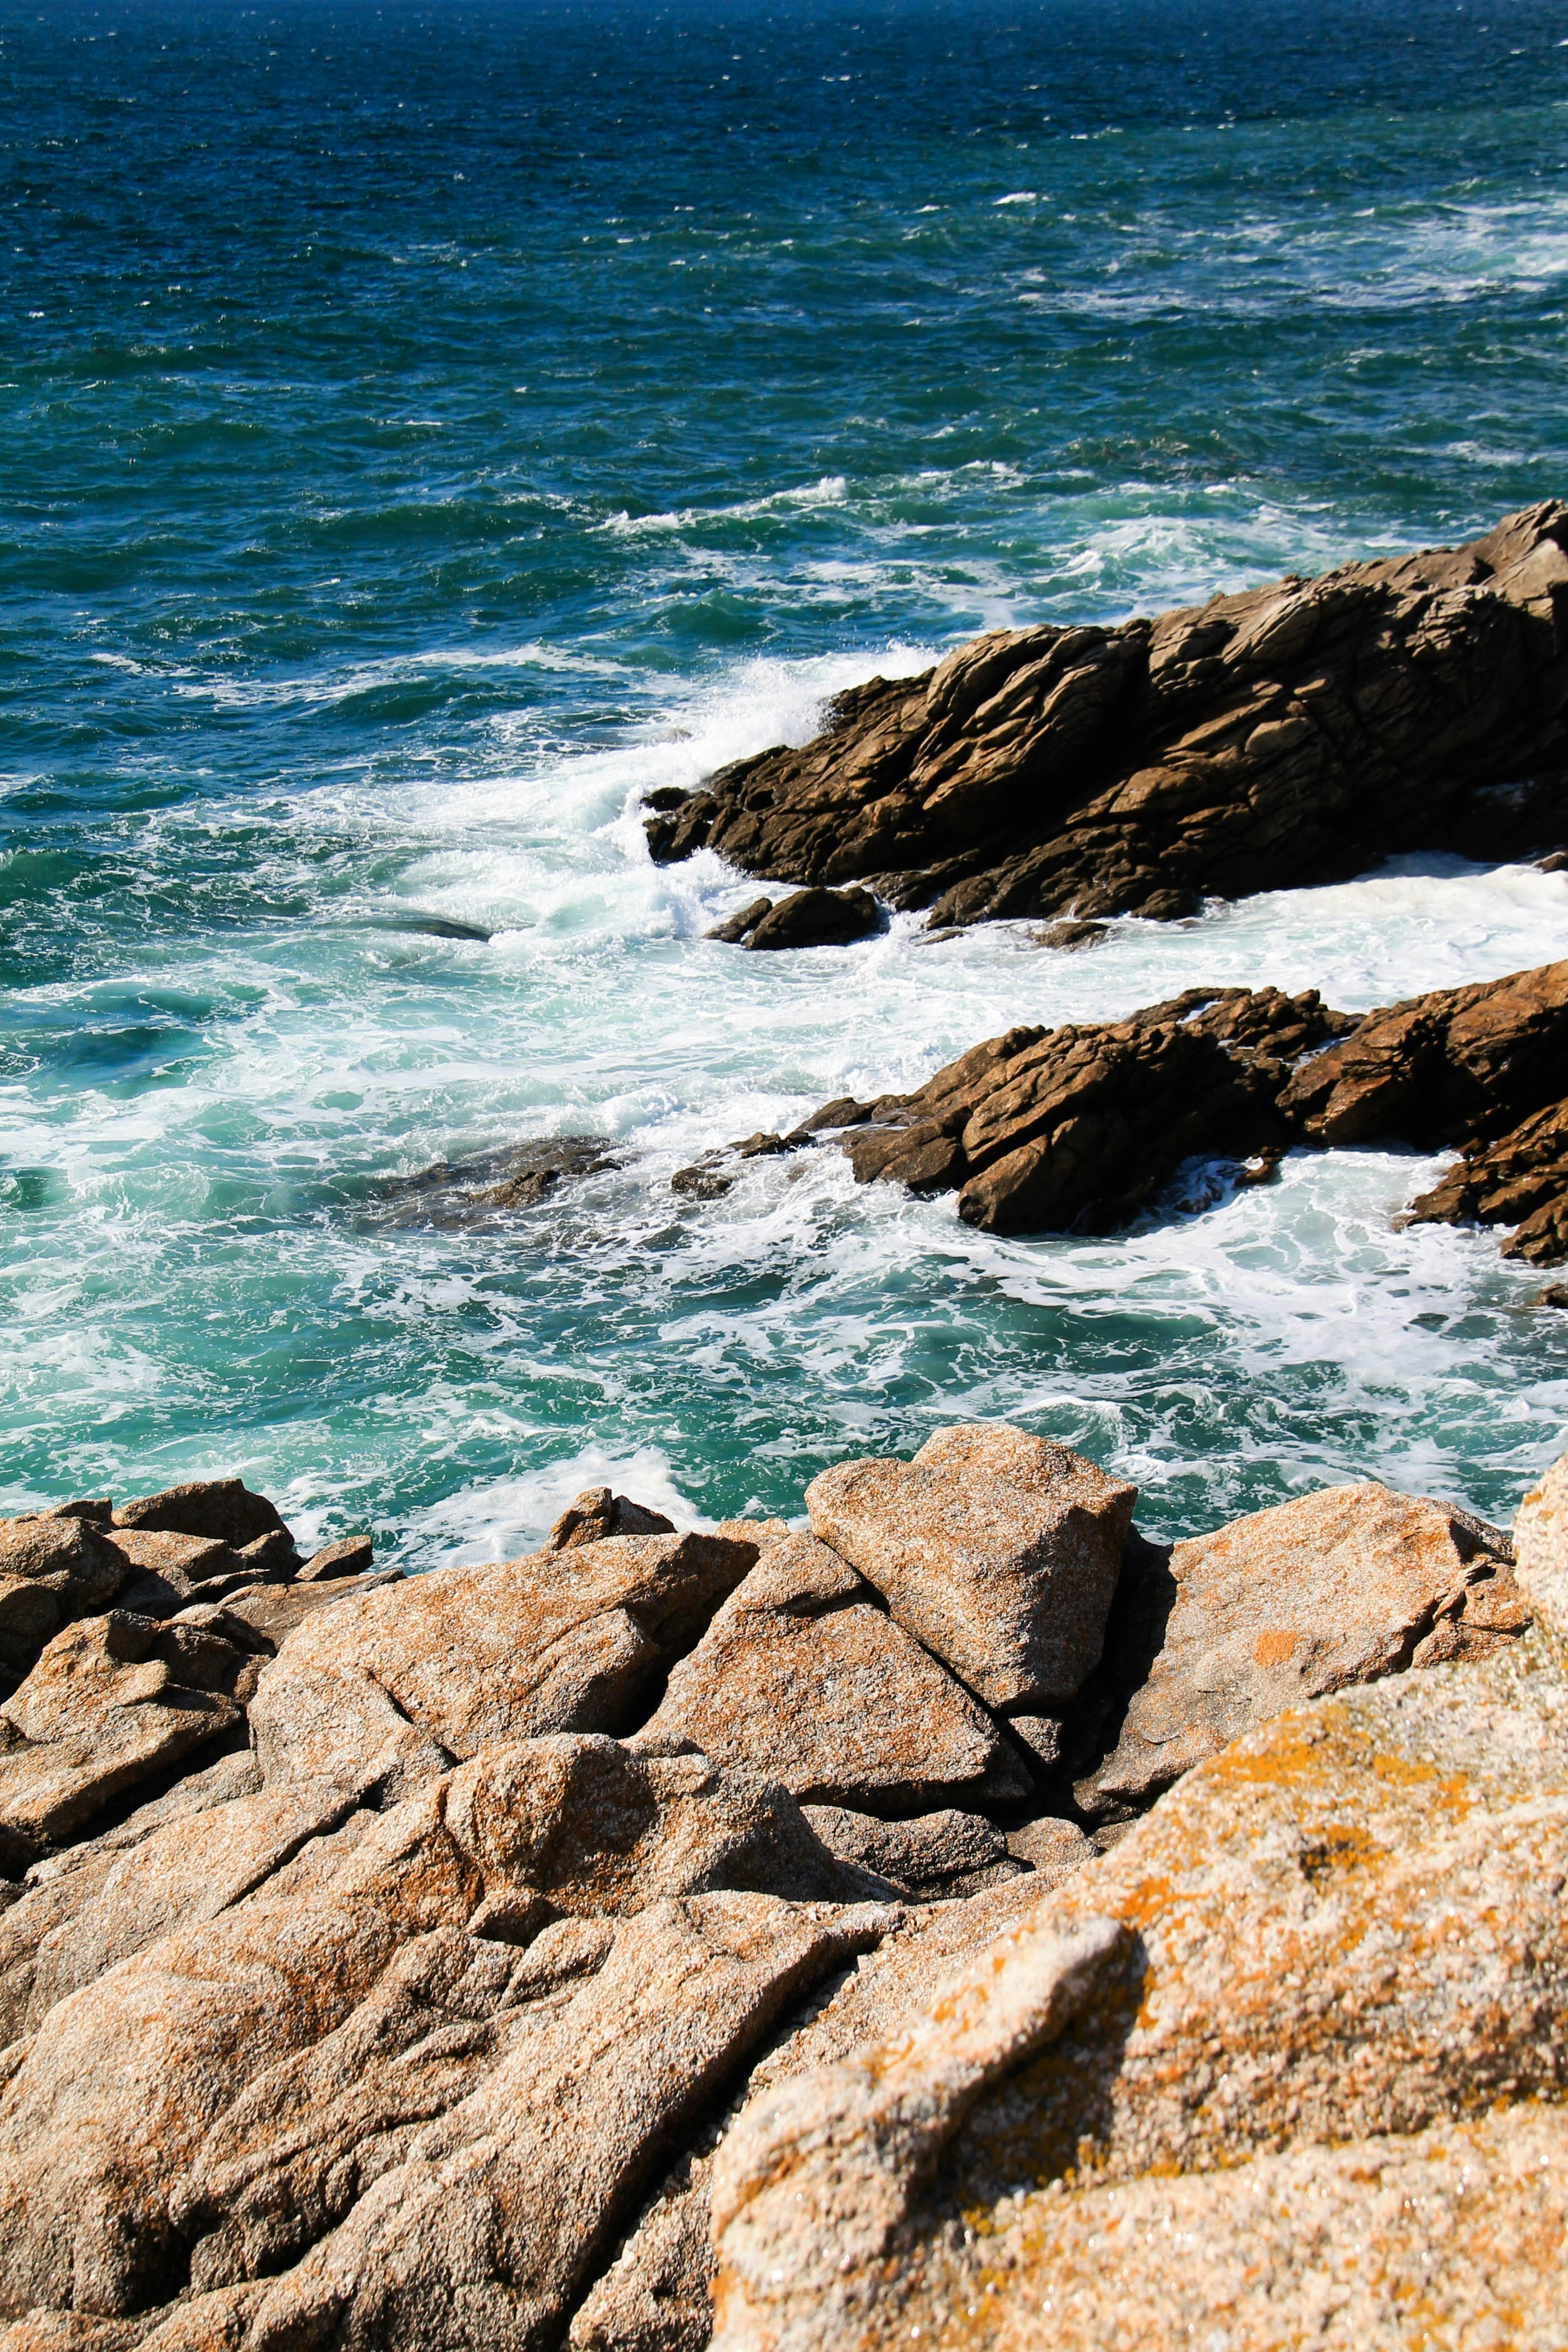 brown rocky shore with ocean waves crashing on rocks during daytime